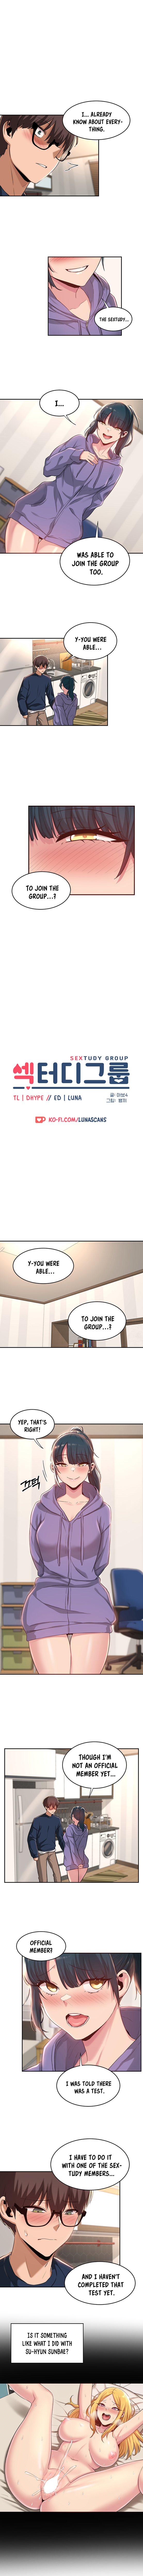 Panel Image 1 for chapter 20 of manhwa Sex Study Group on read.oppai.stream